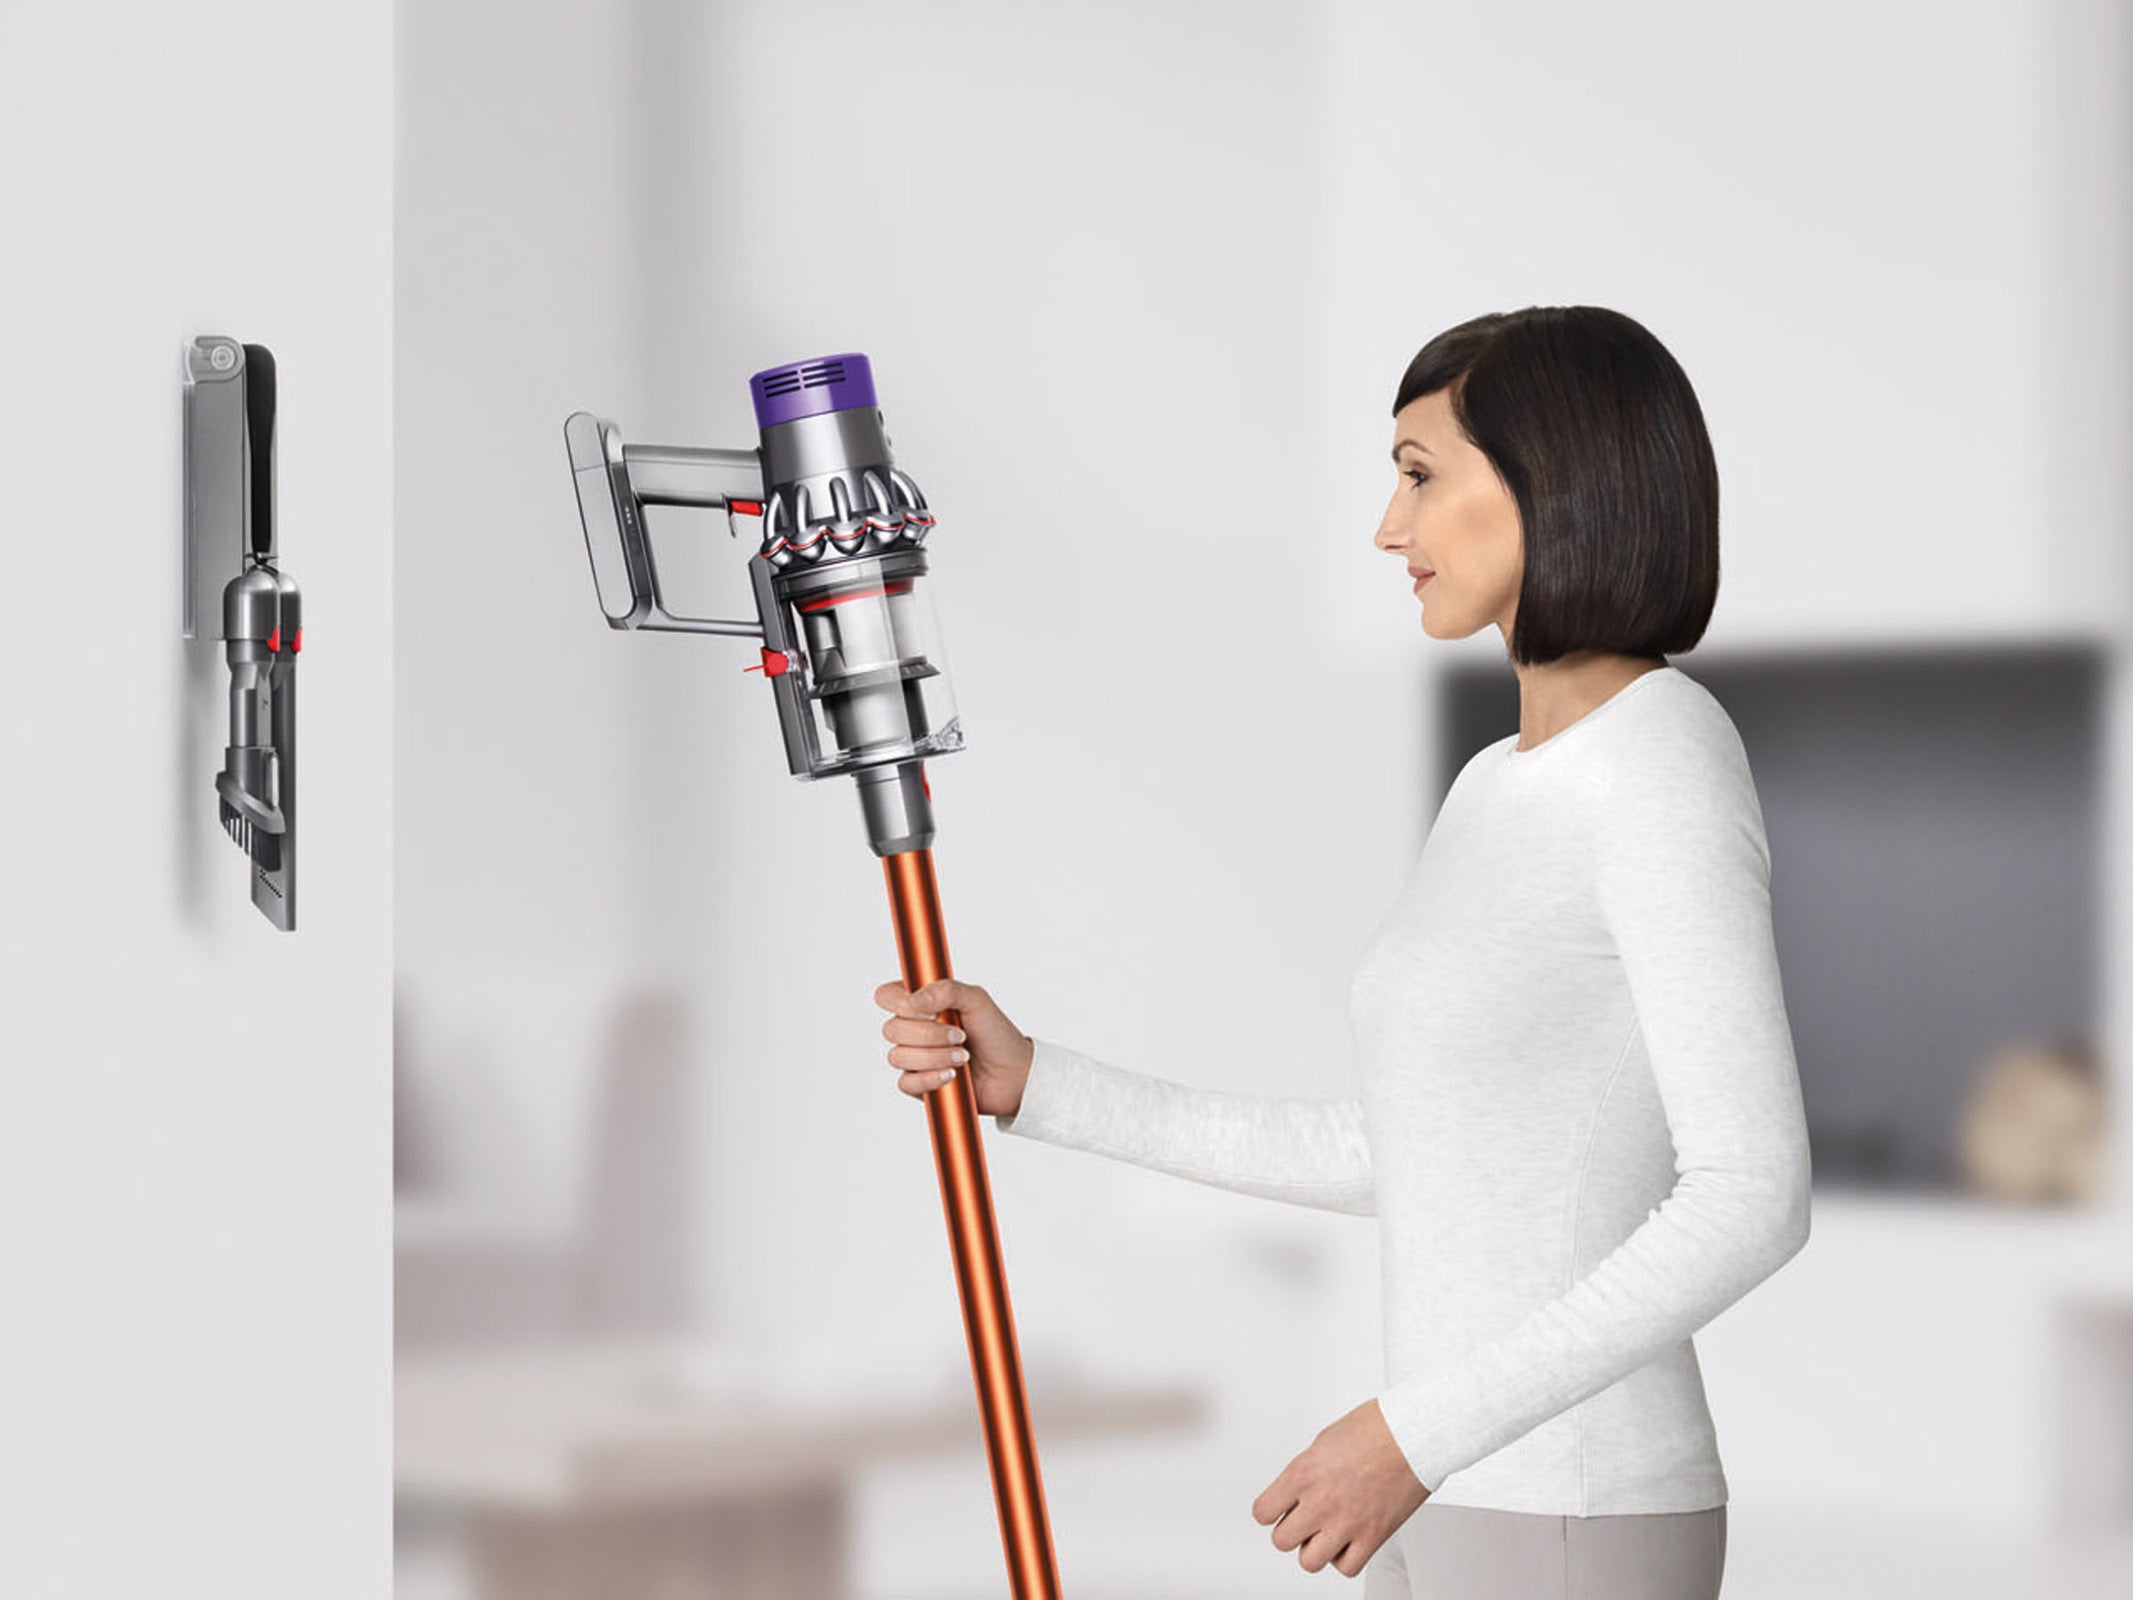 Dyson Cyclone V10 Absolute Review | Trusted Reviews